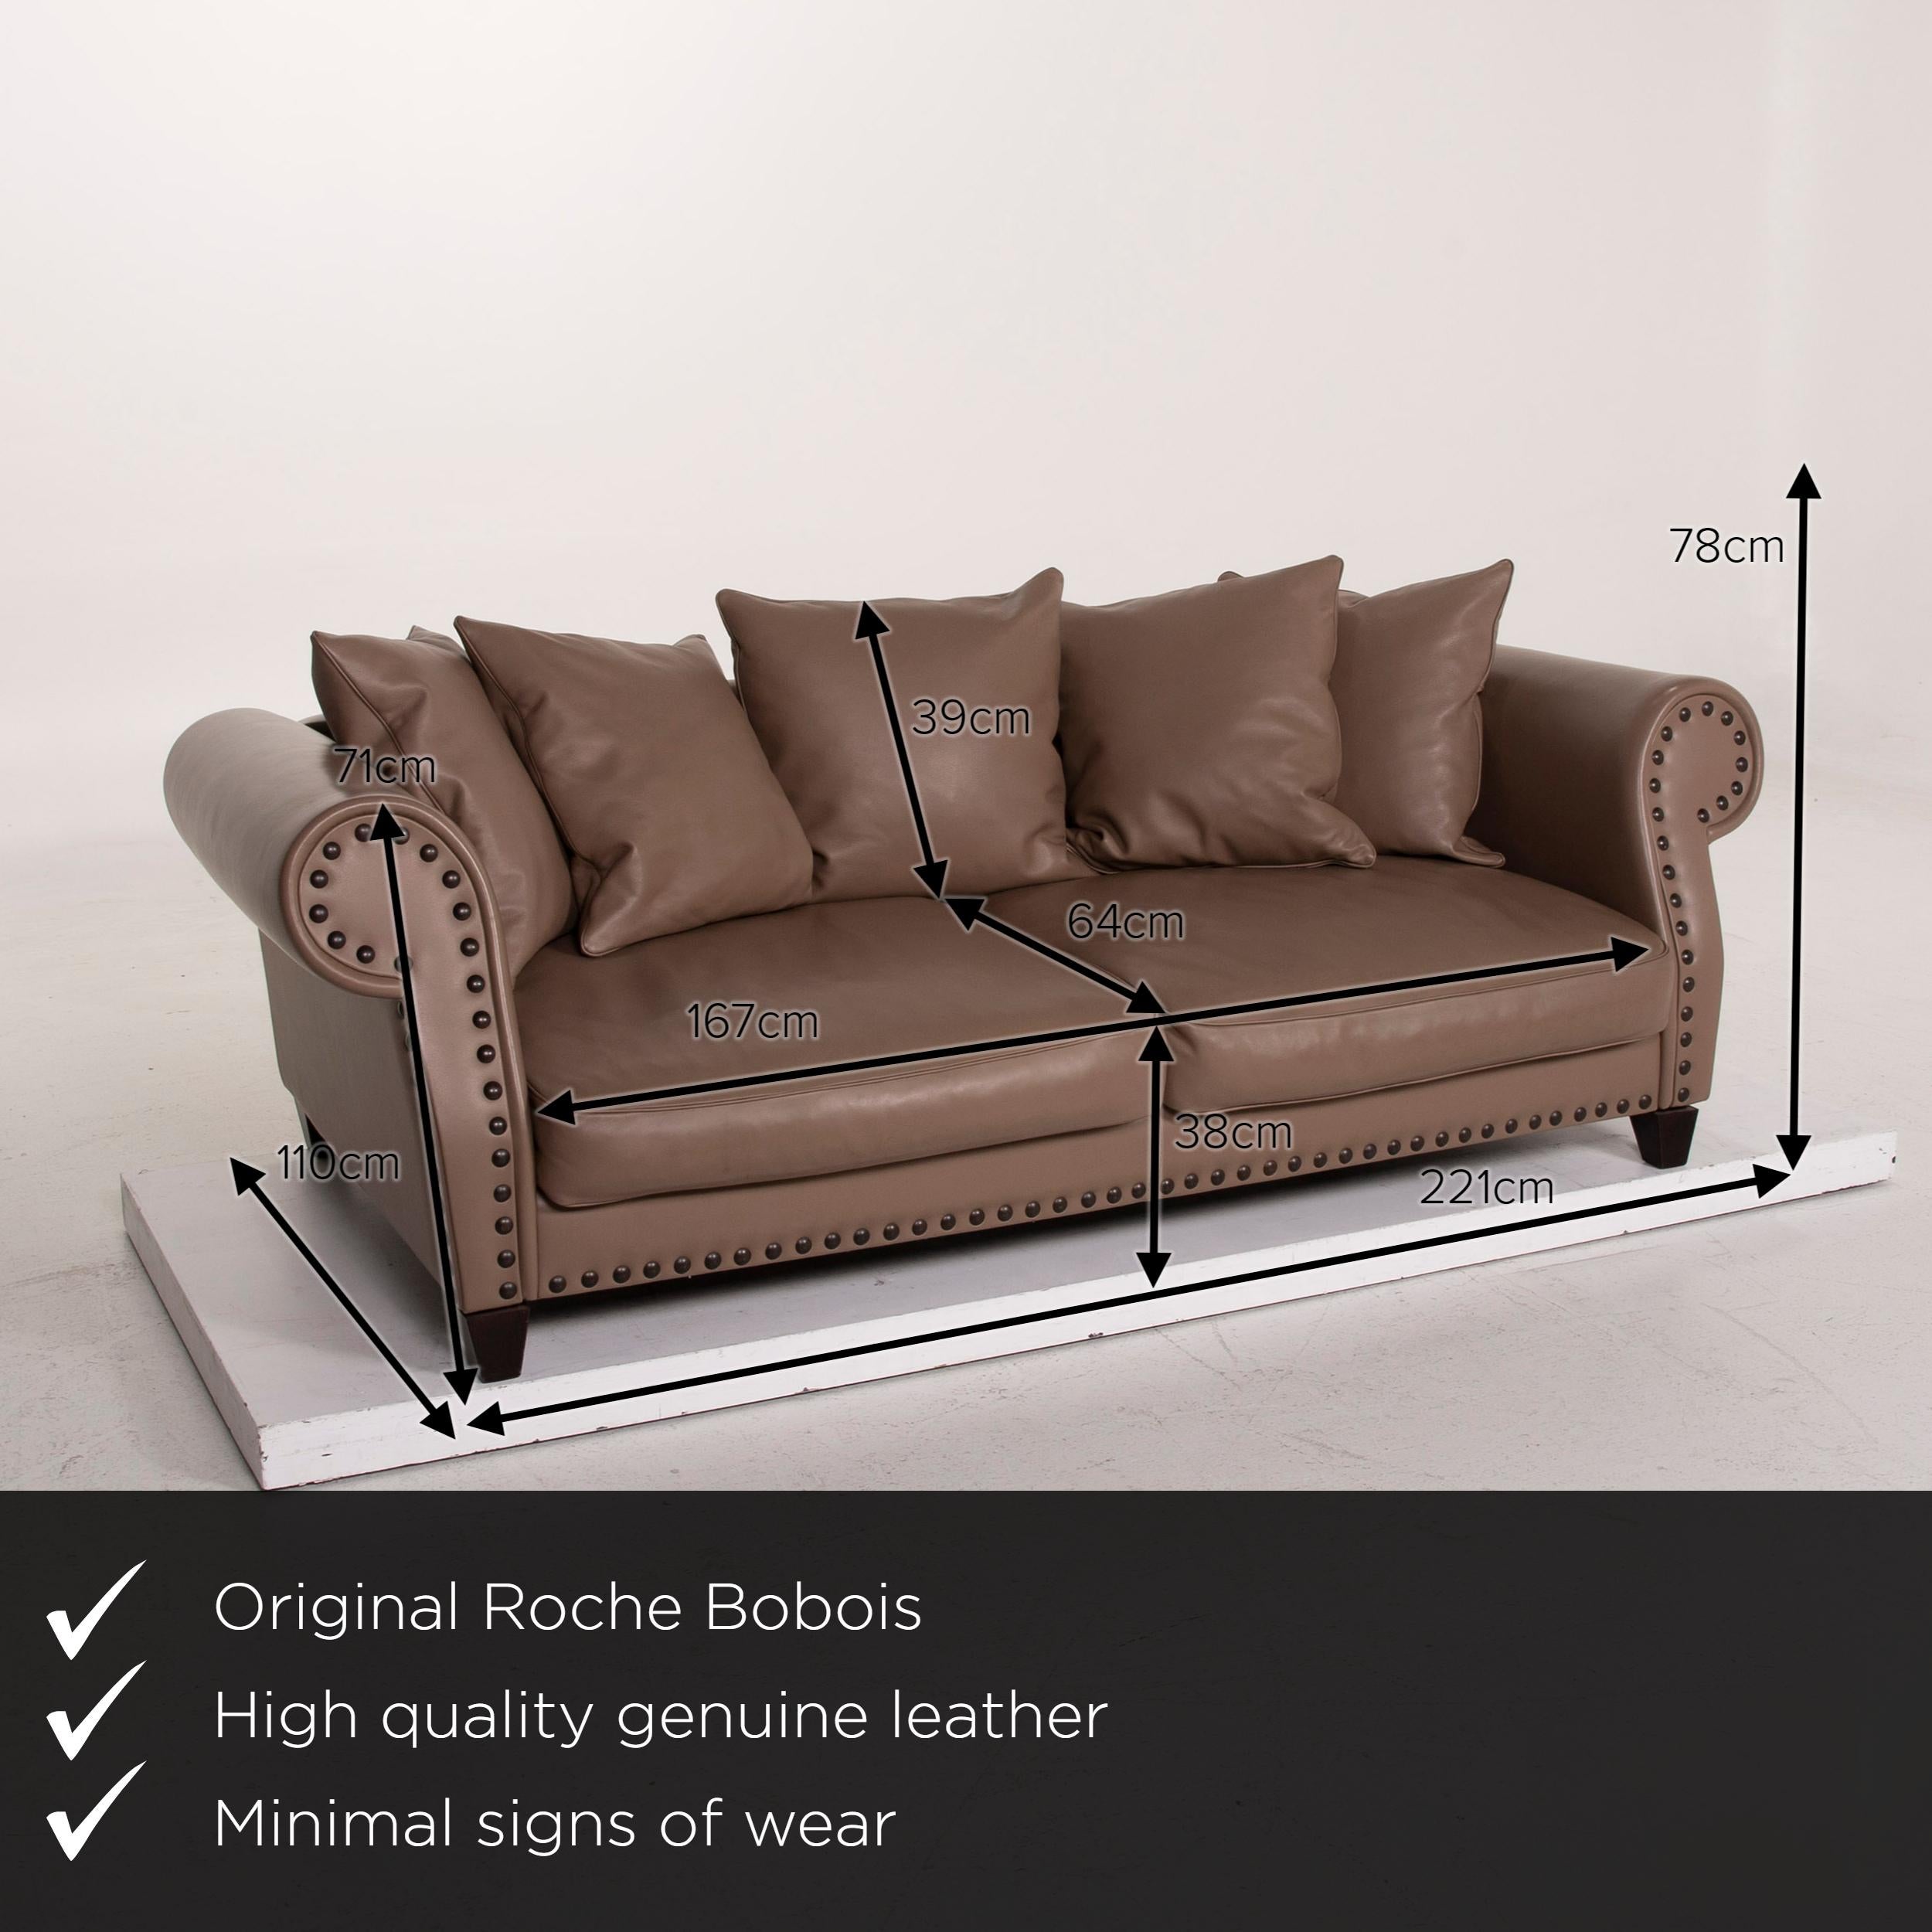 We present to you a Roche Bobois Chester chic leather sofa brown three-seat.
  
 

 Product measurements in centimeters:
 

Depth 110
Width 221
Height 78
Seat height 38
Rest height 71
Seat depth 64
Seat width 167
Back height 39.